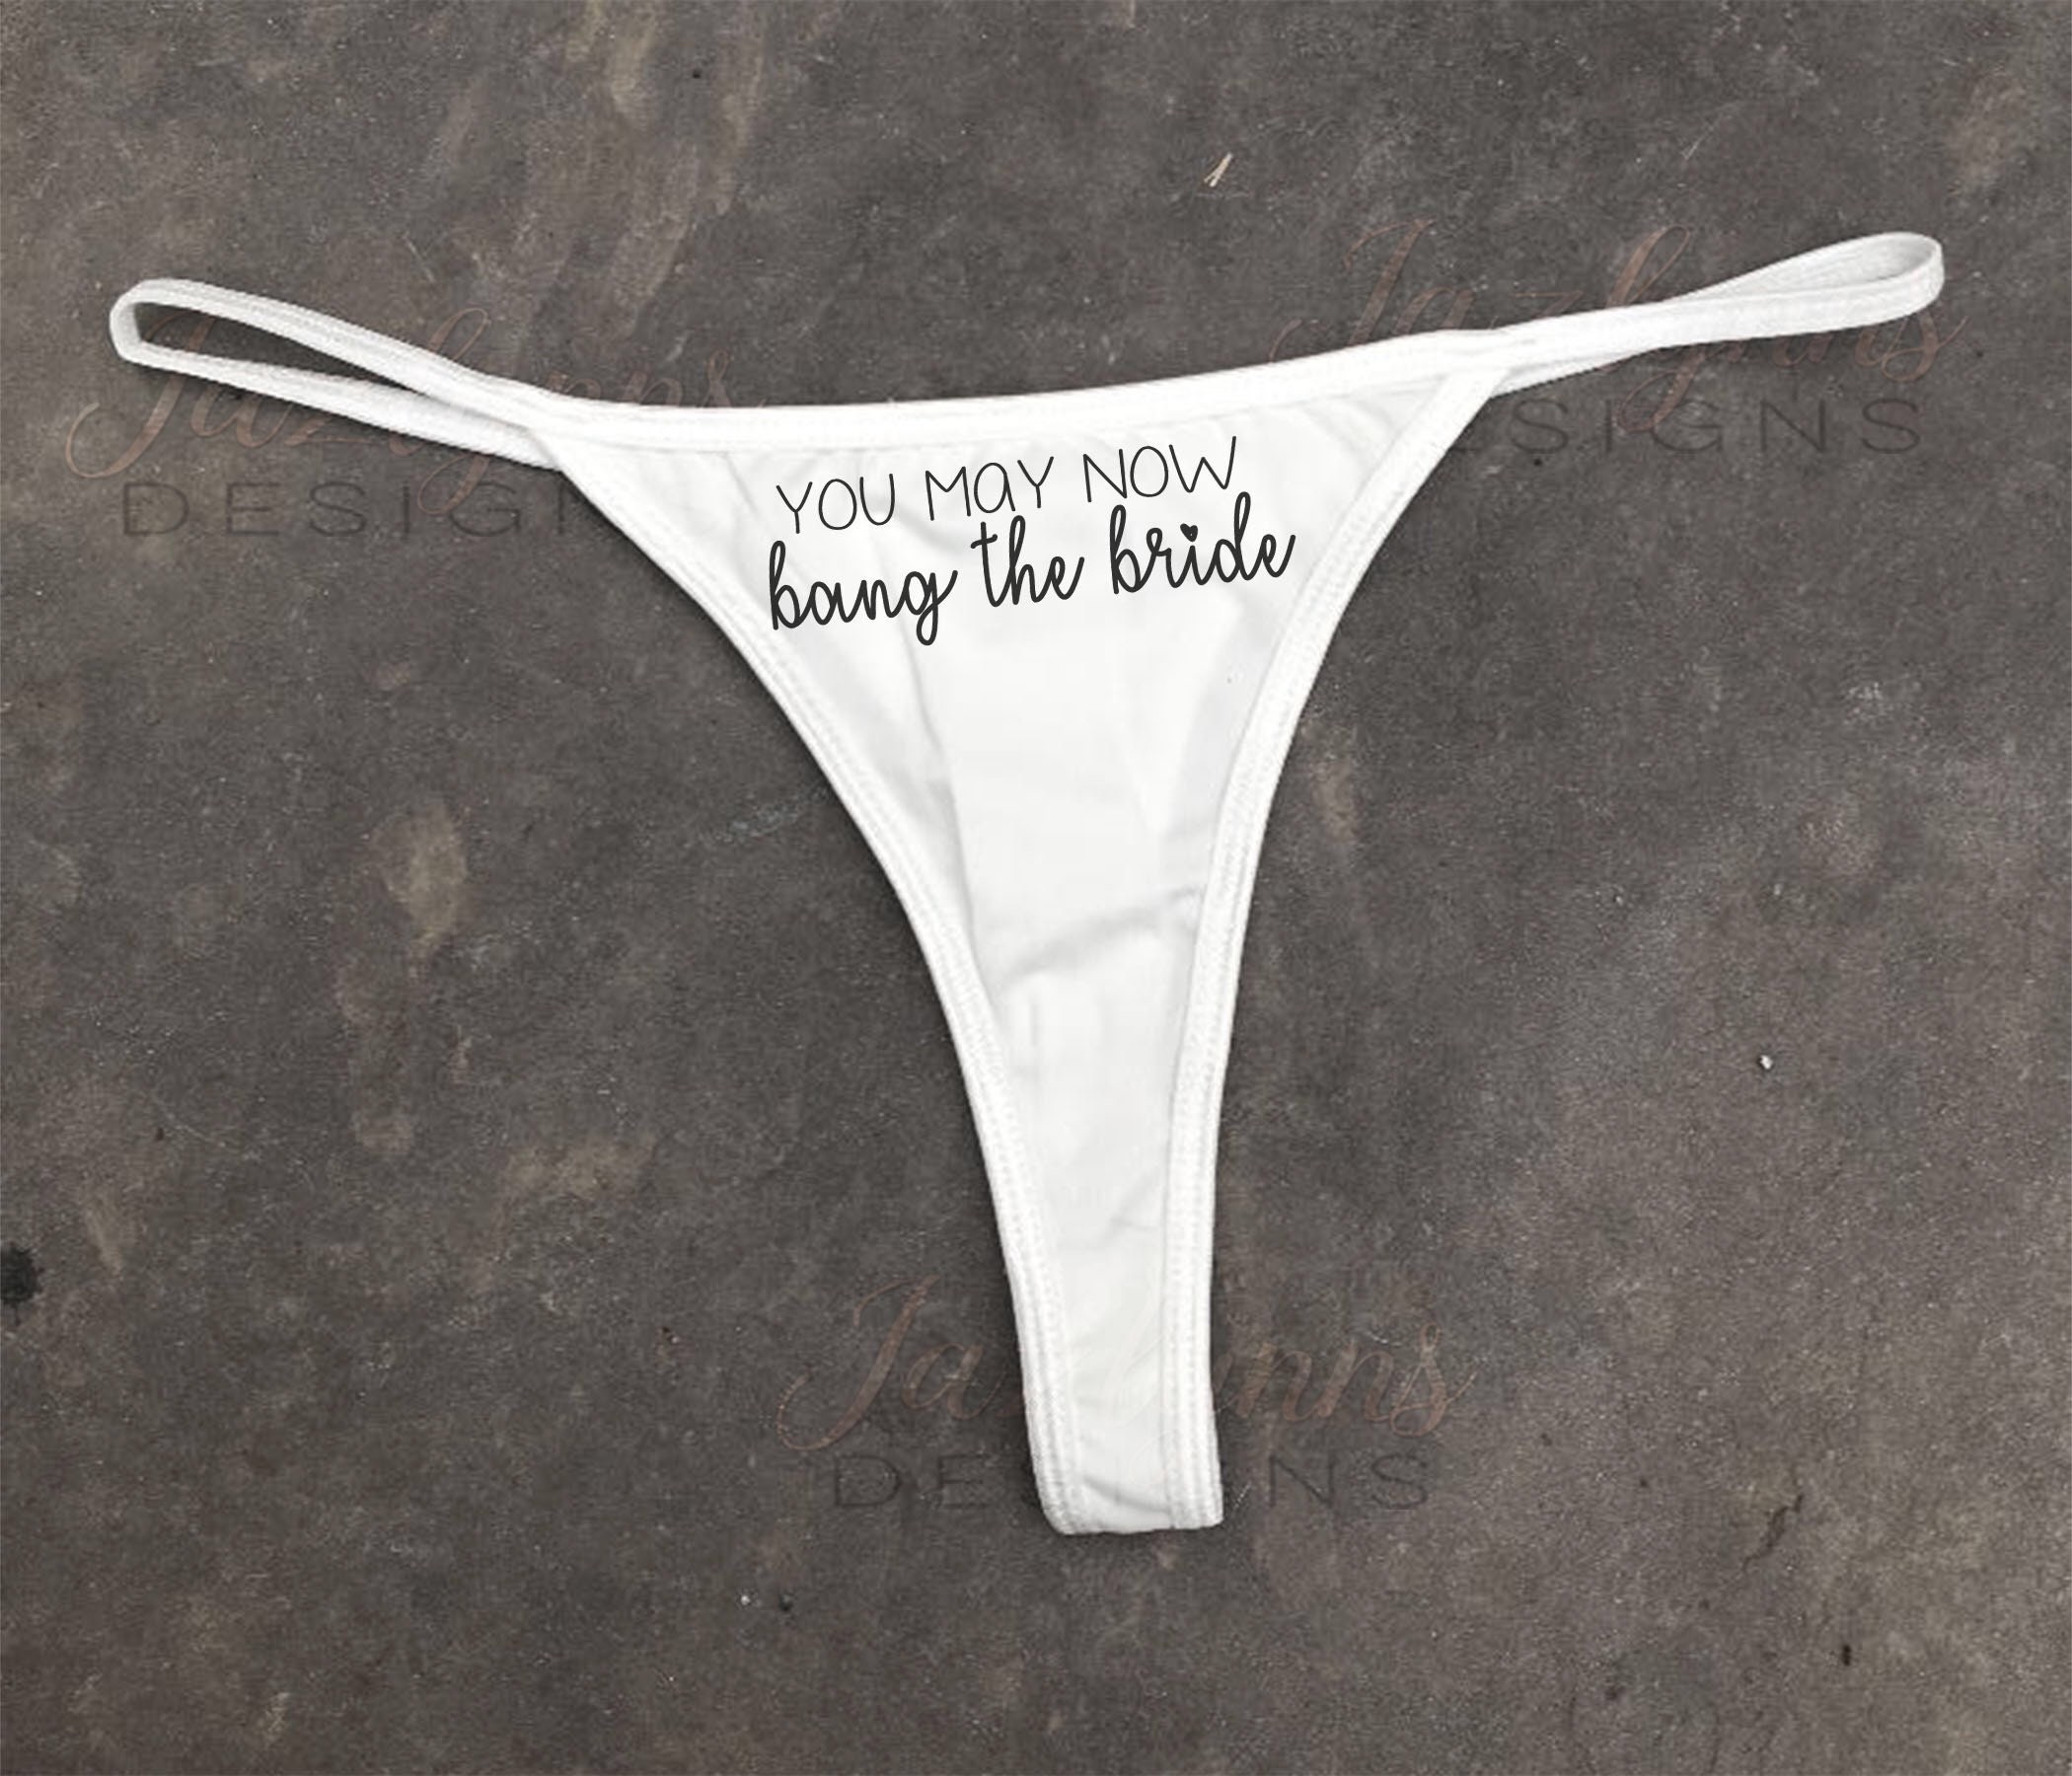 You May Now Fuck the Bride Thong/bang the Wife/wedding